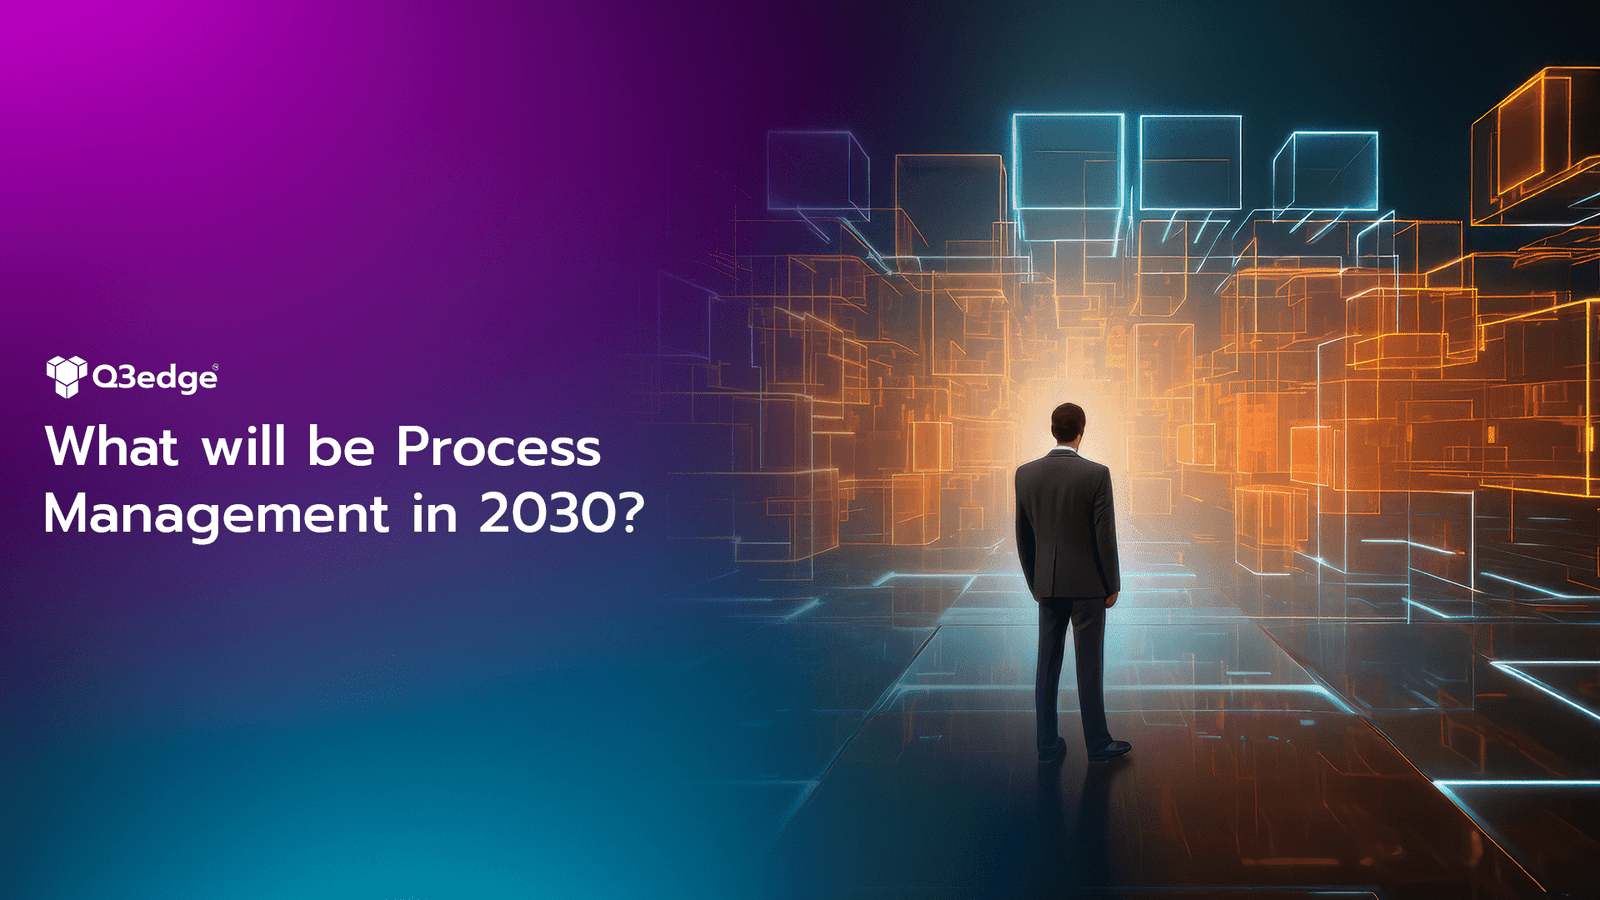 Process Management in 2030